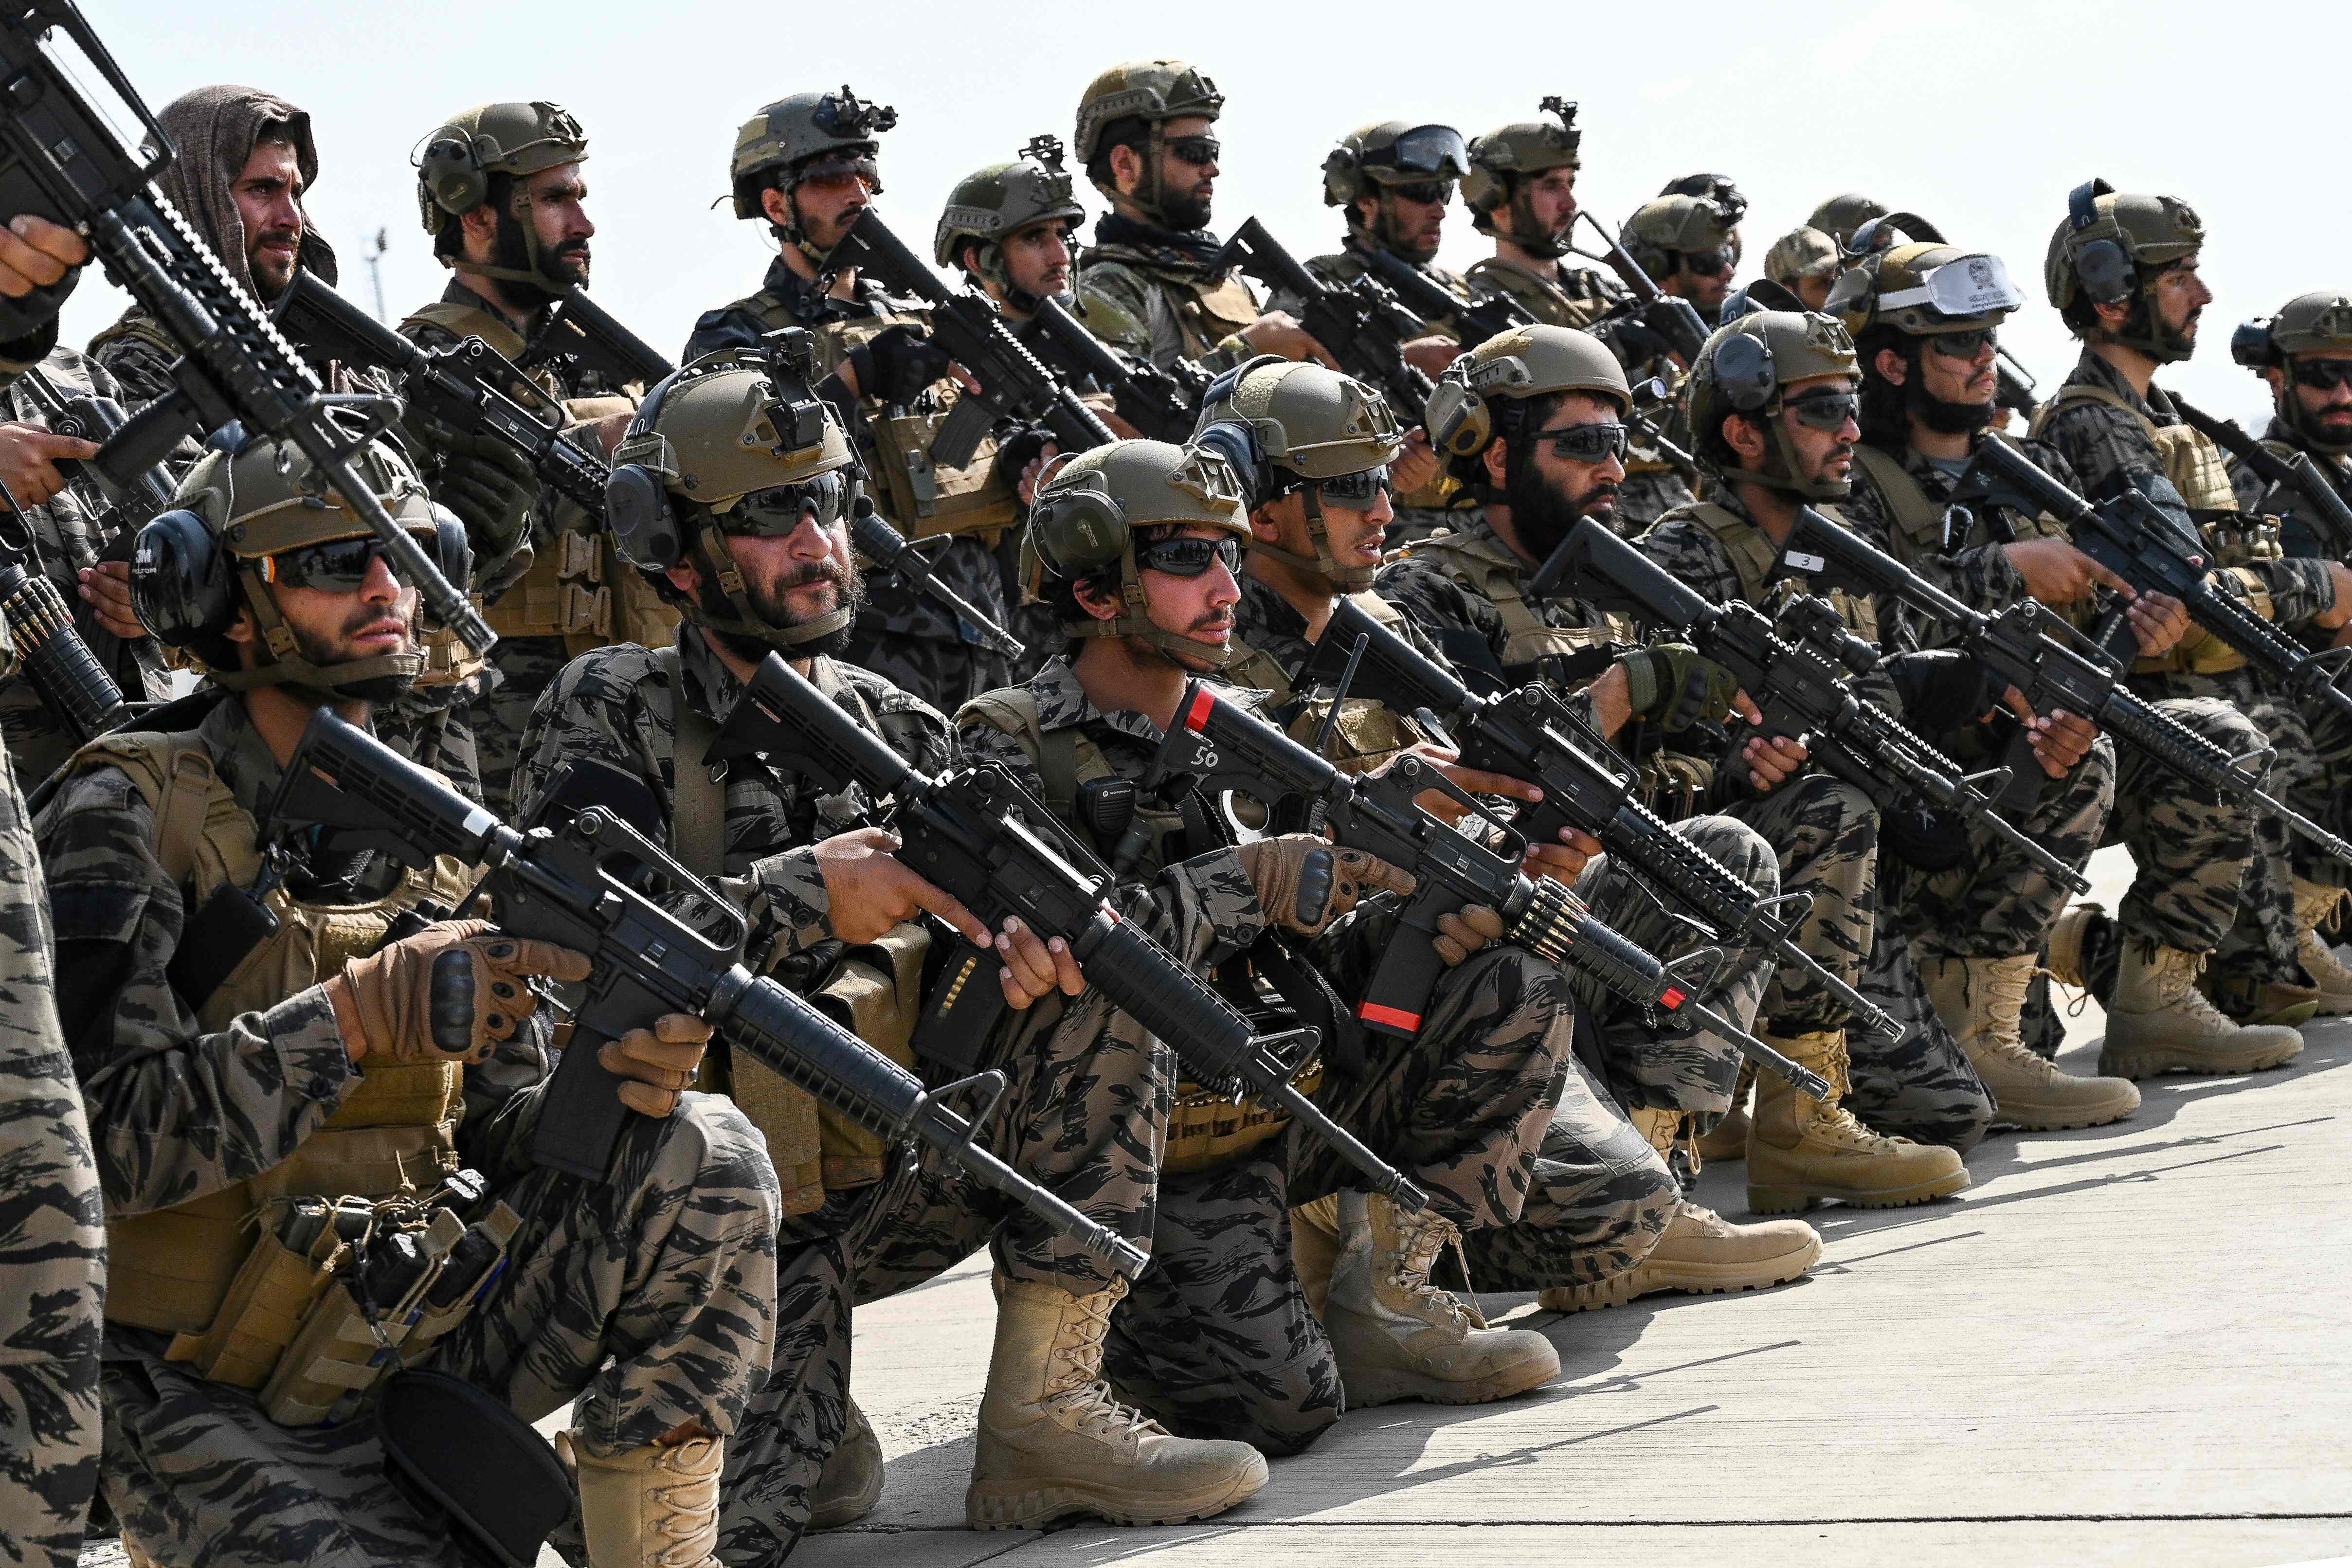 Taliban special force fighters at Kabul airport on Tuesday, after the last US troops withdrew to end a brutal 20-year war that had started with ousting the hardline Islamist insurgent group. Photo: AFP